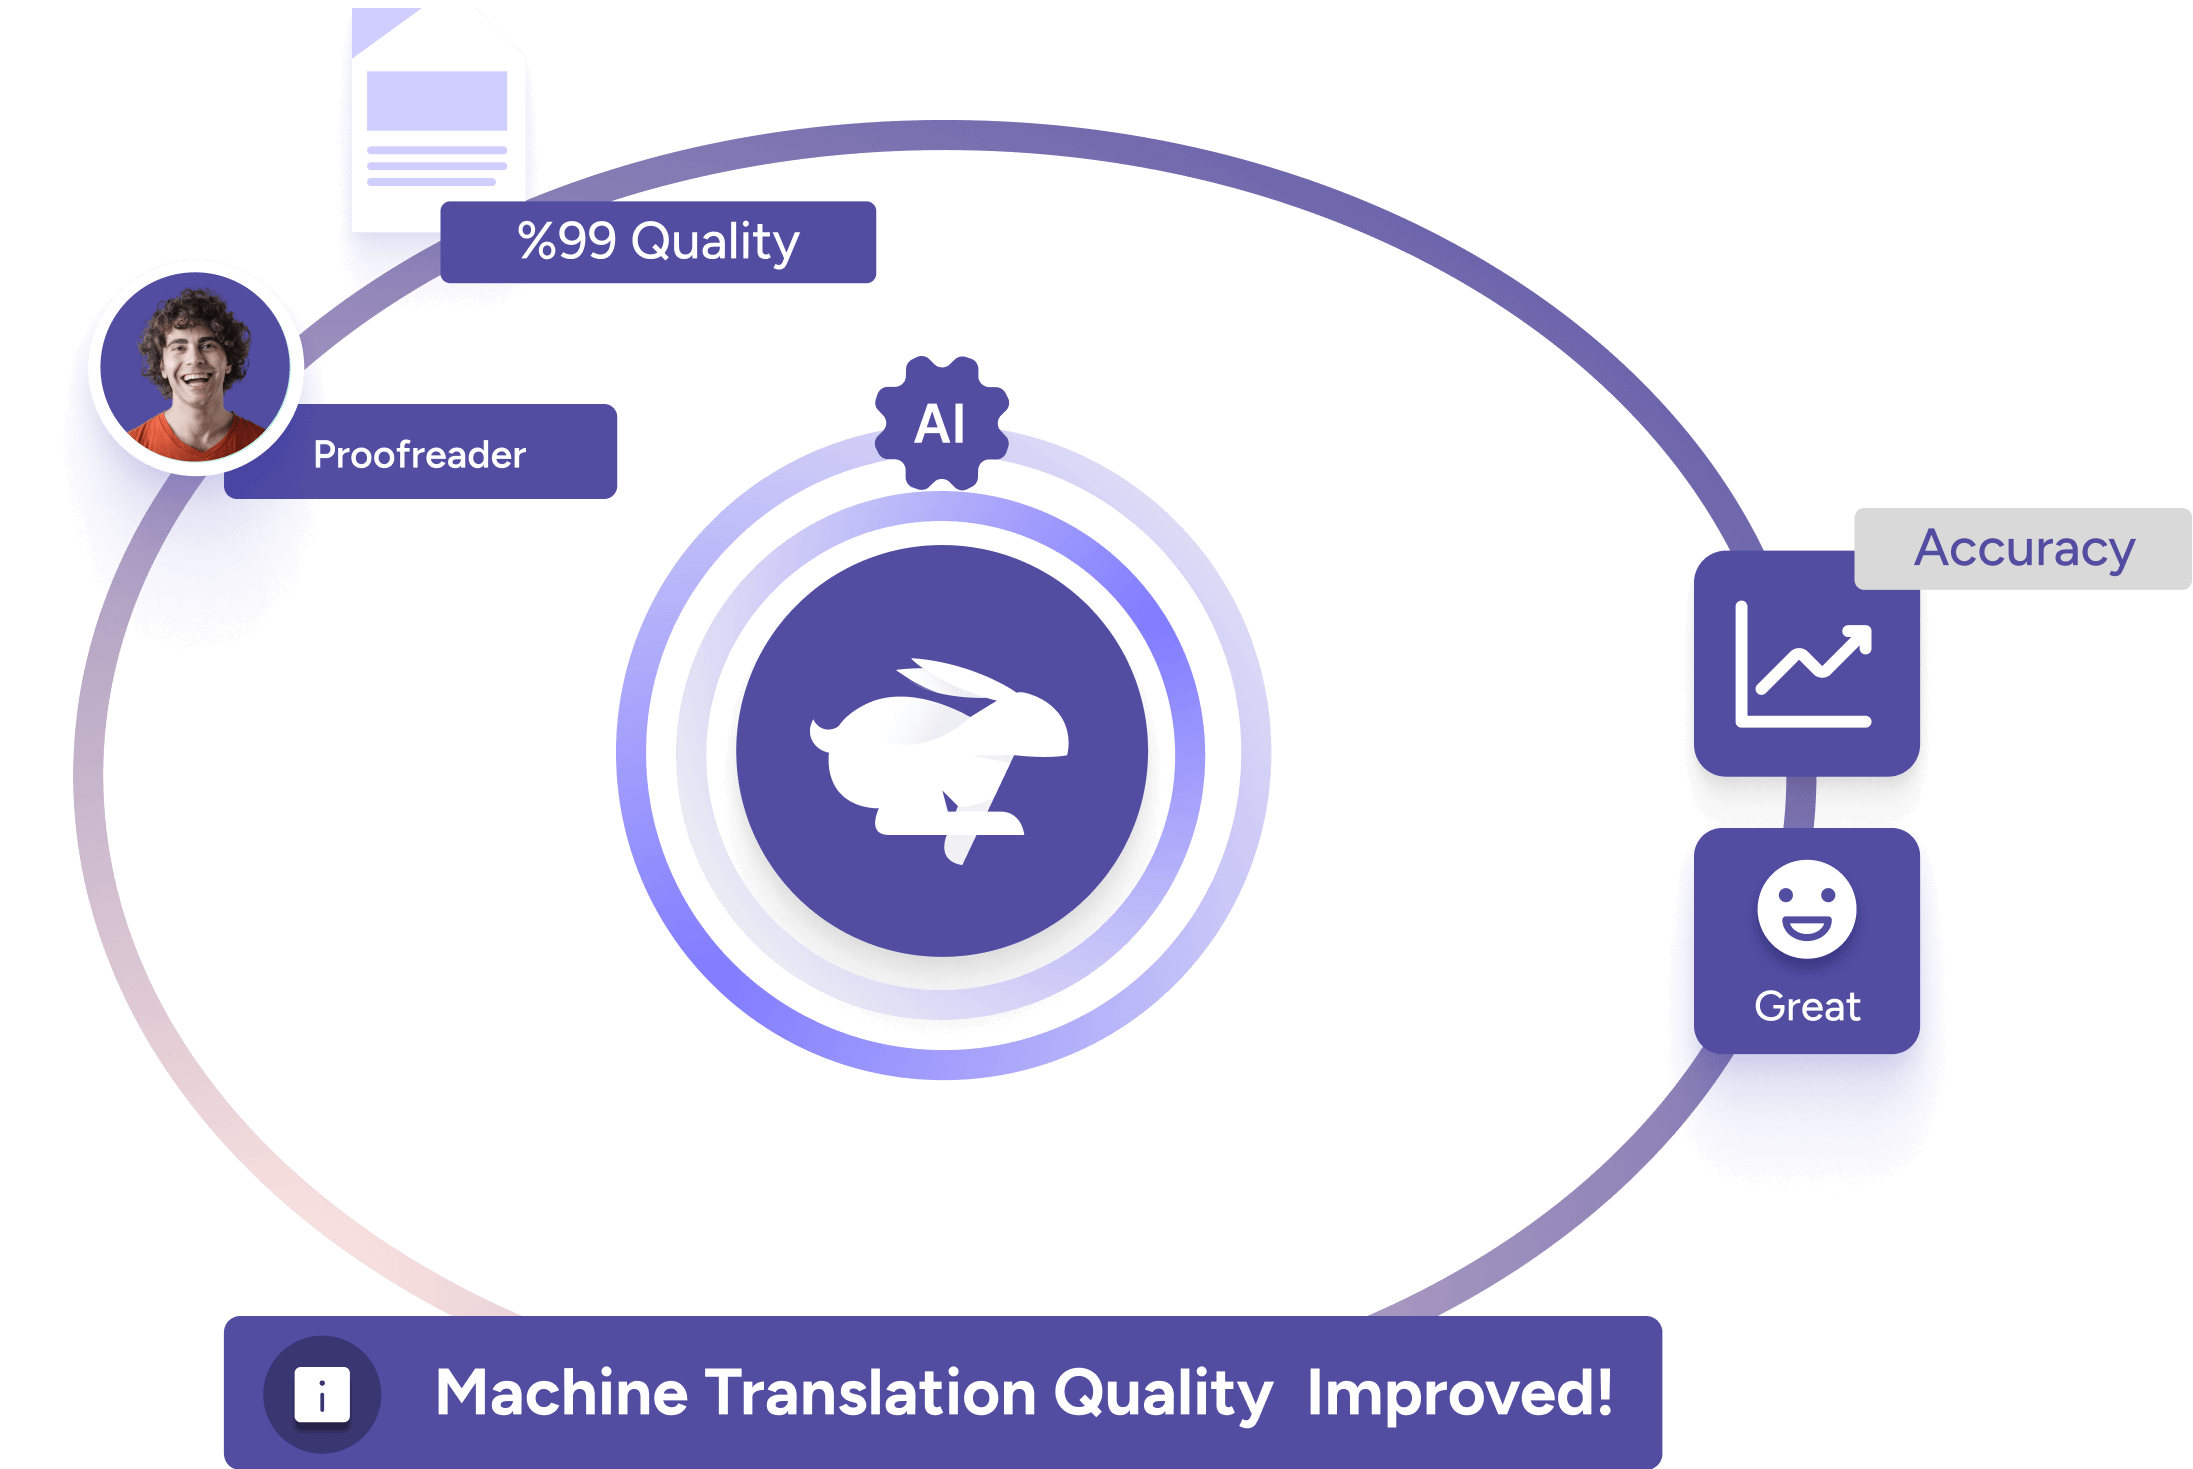 Machine Translation Quality Improved with the best AI solution for each project.